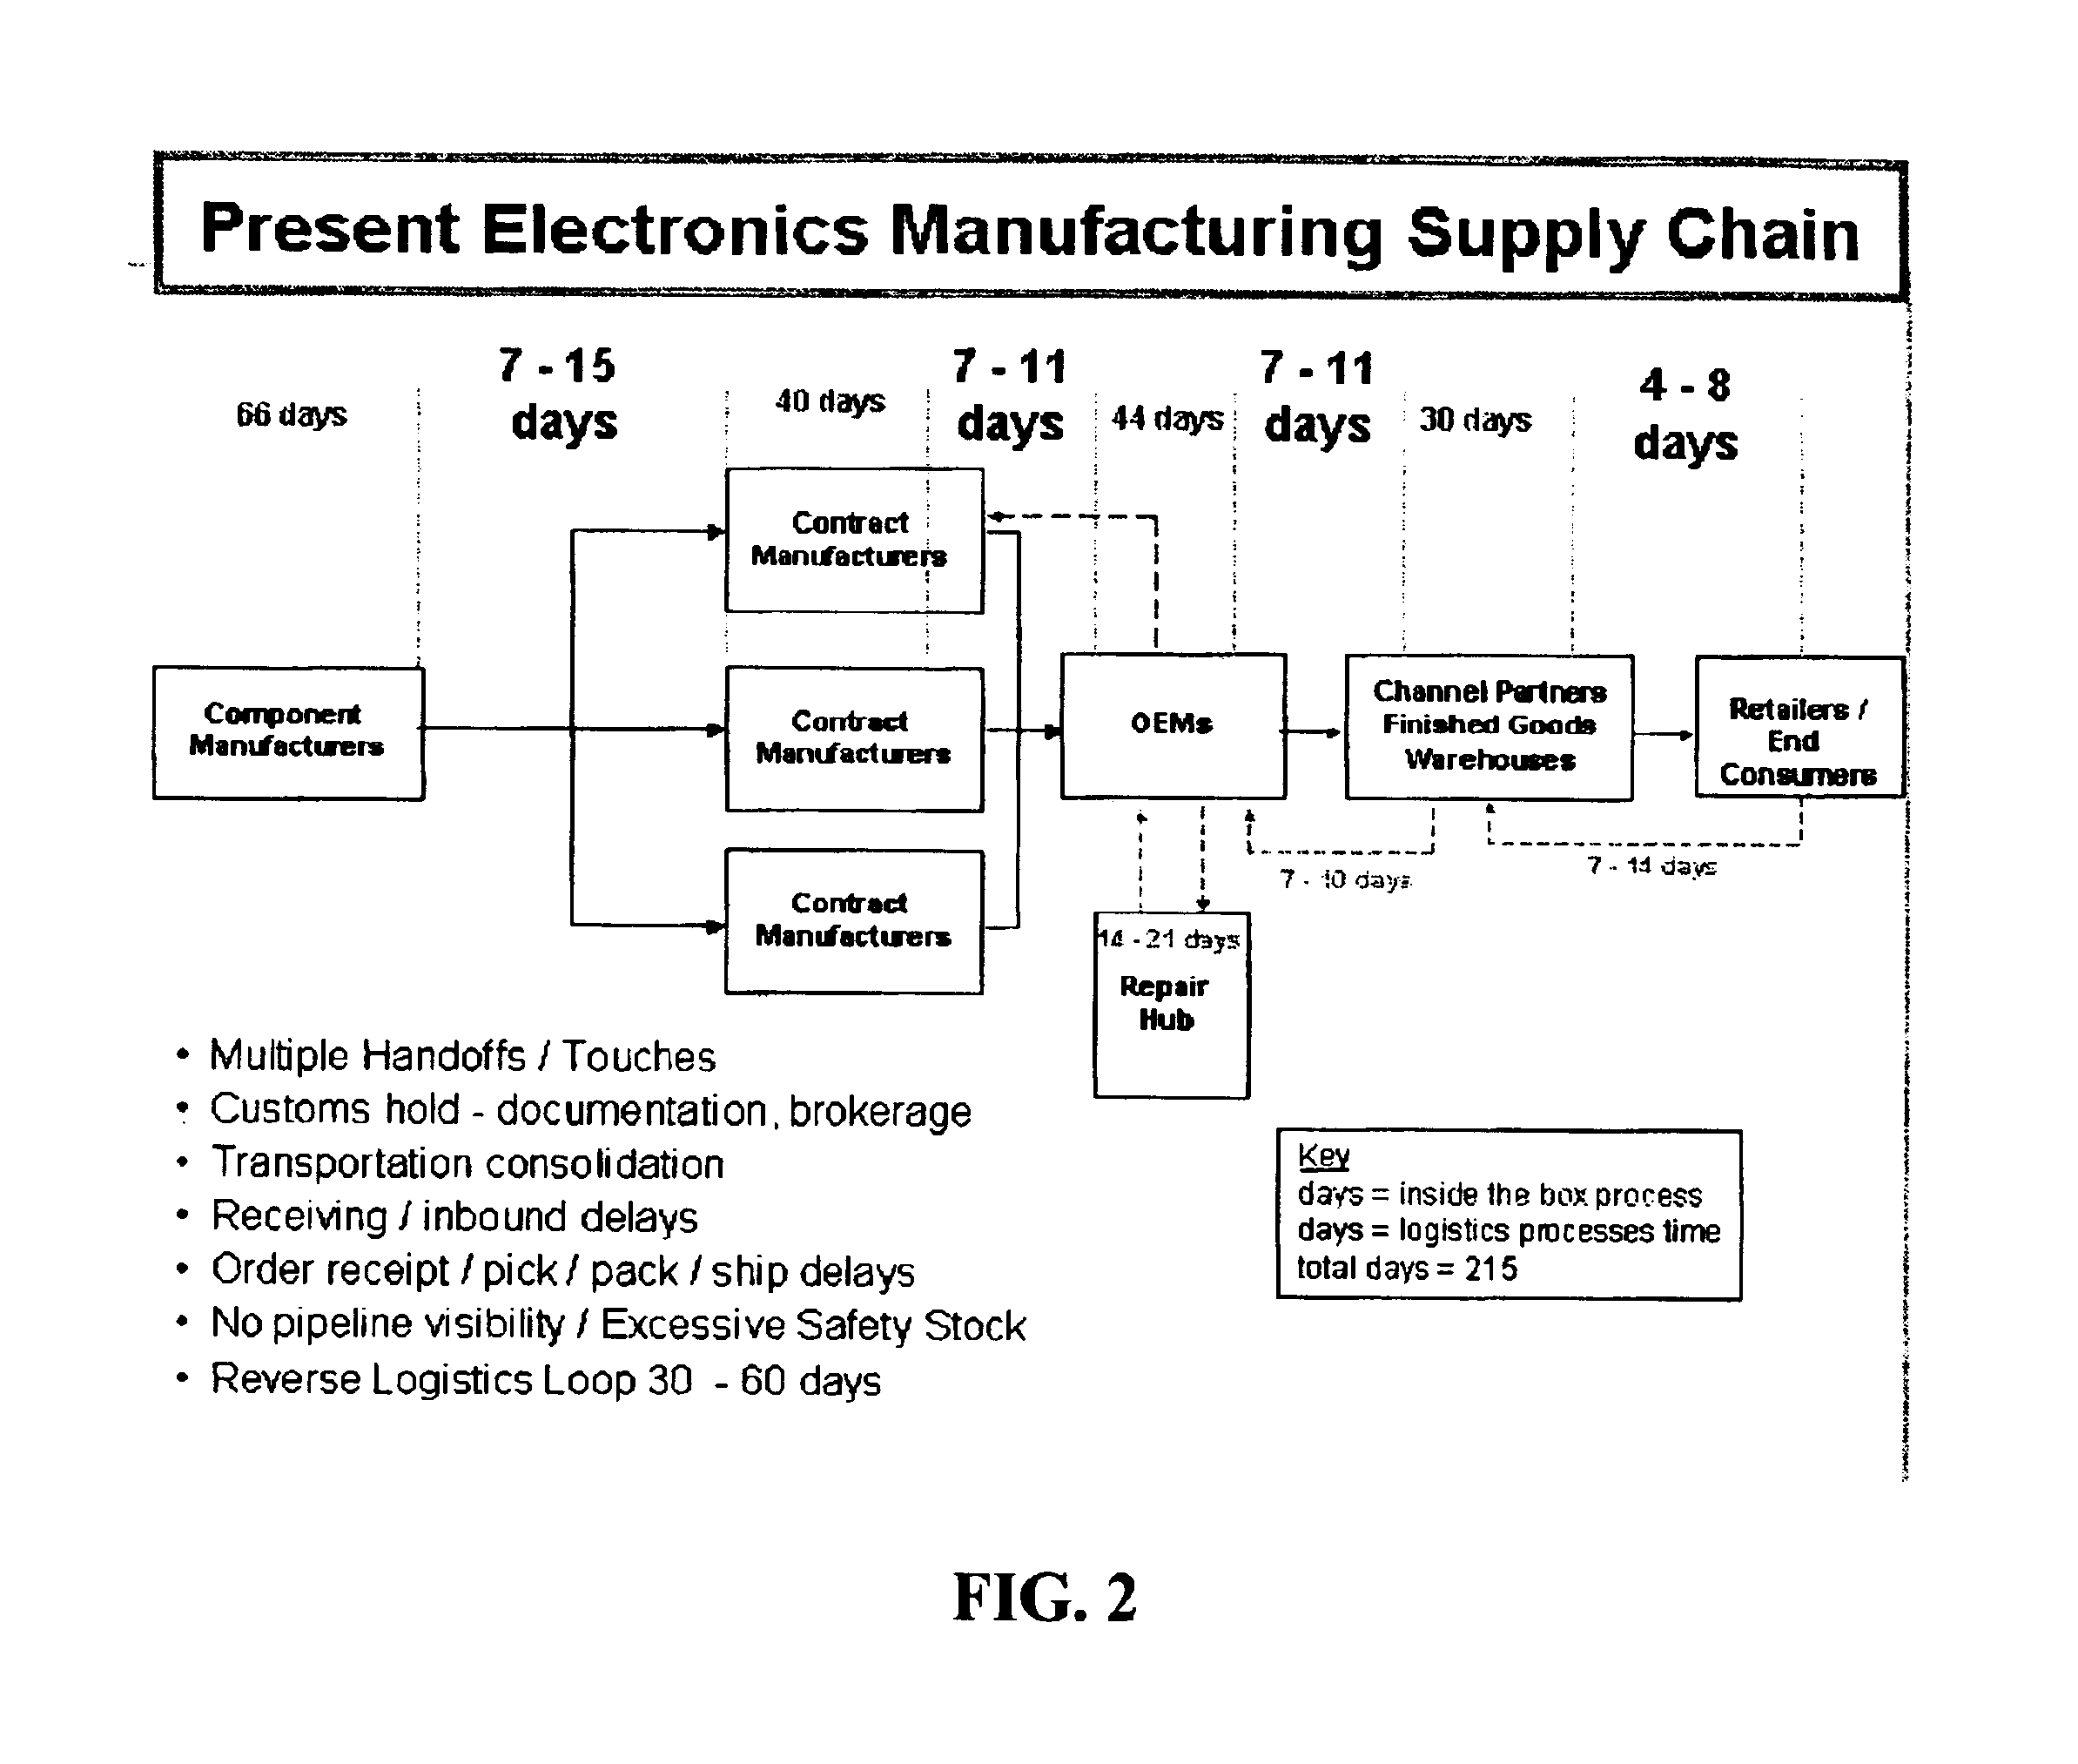 Inventory management system for reducing overall warehouse and pipeline inventory